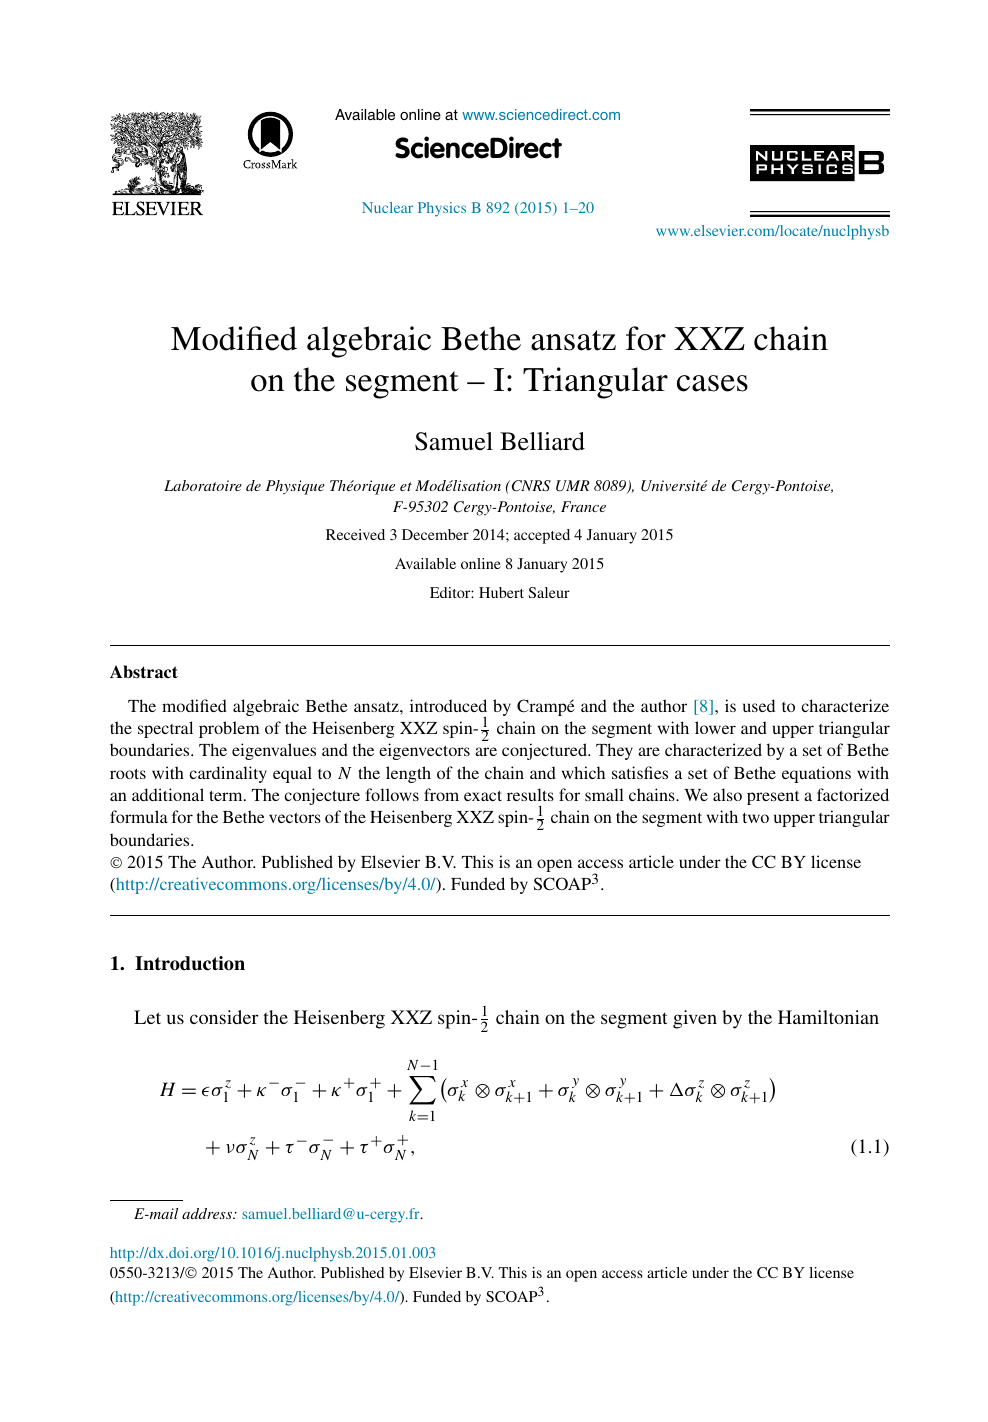 Modified Algebraic Bethe Ansatz For Xxz Chain On The Segment I Triangular Cases Topic Of Research Paper In Physical Sciences Download Scholarly Article Pdf And Read For Free On Cyberleninka